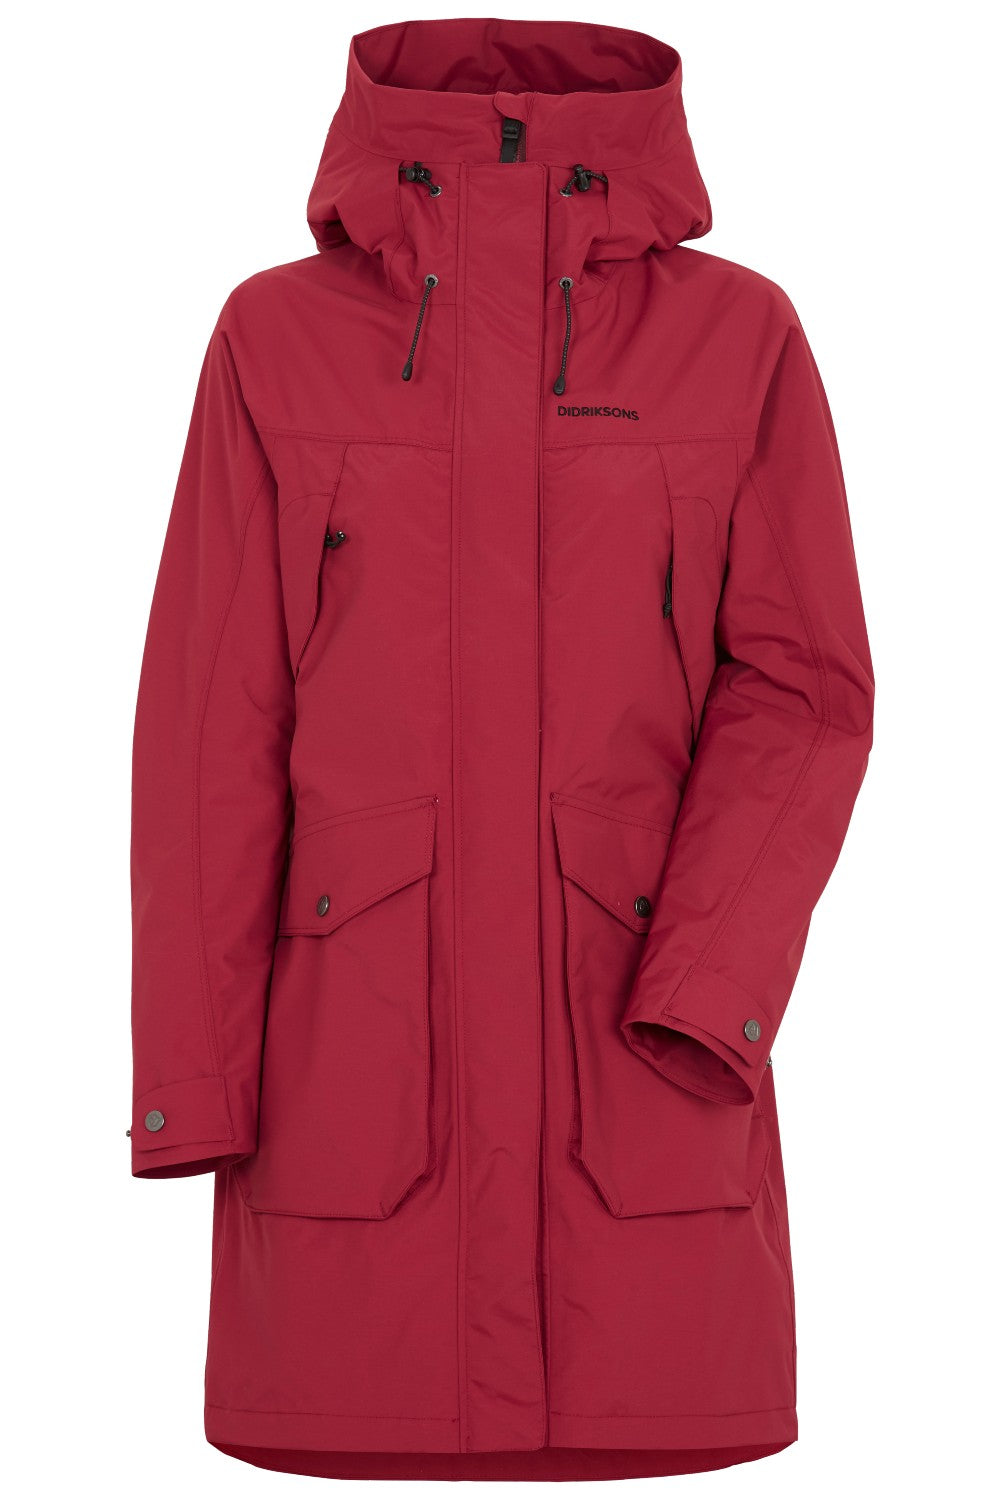 Didriksons Thelma Ladies Parka 8- Ruby Red 